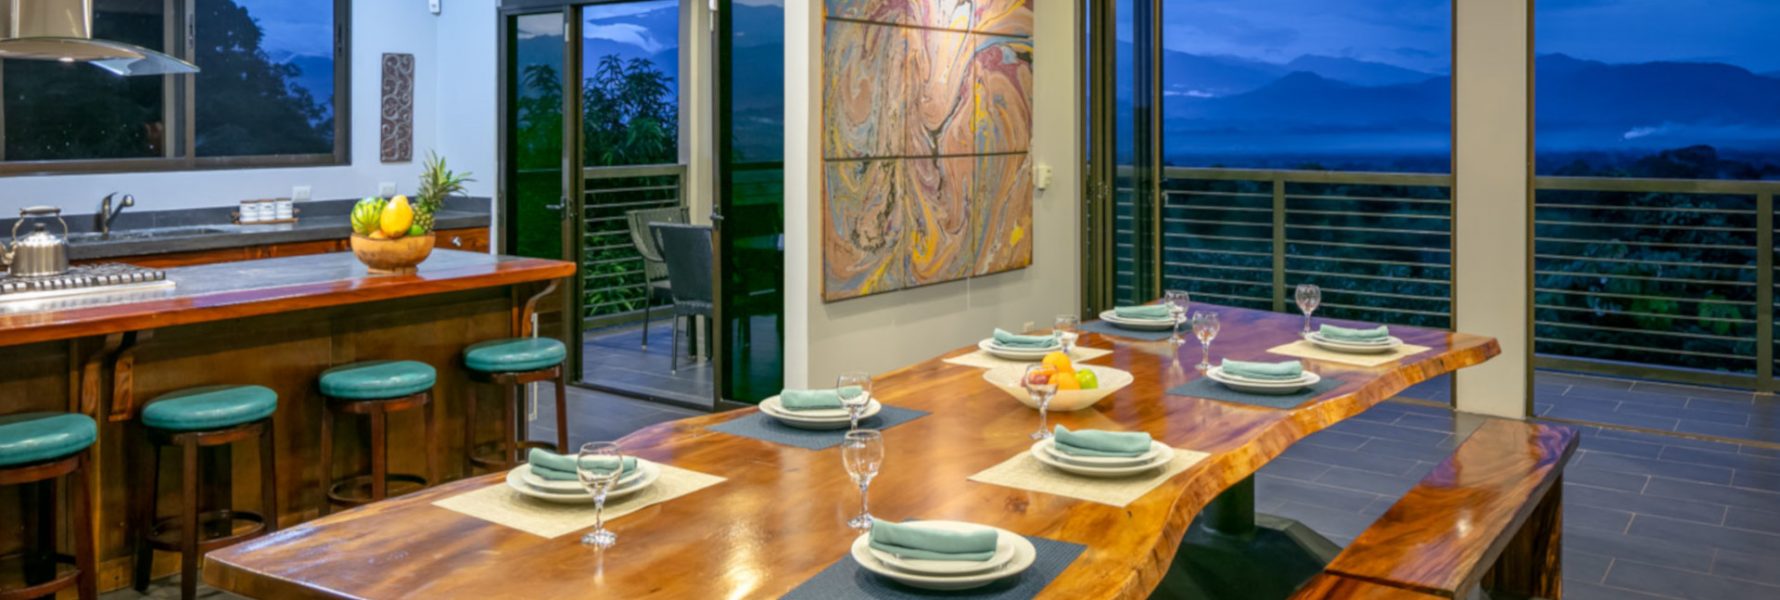 This table is able to seat everyone from your group, friends, and family. It is custom made for this vacation home and has an elegance that adds to the luxury of this house.